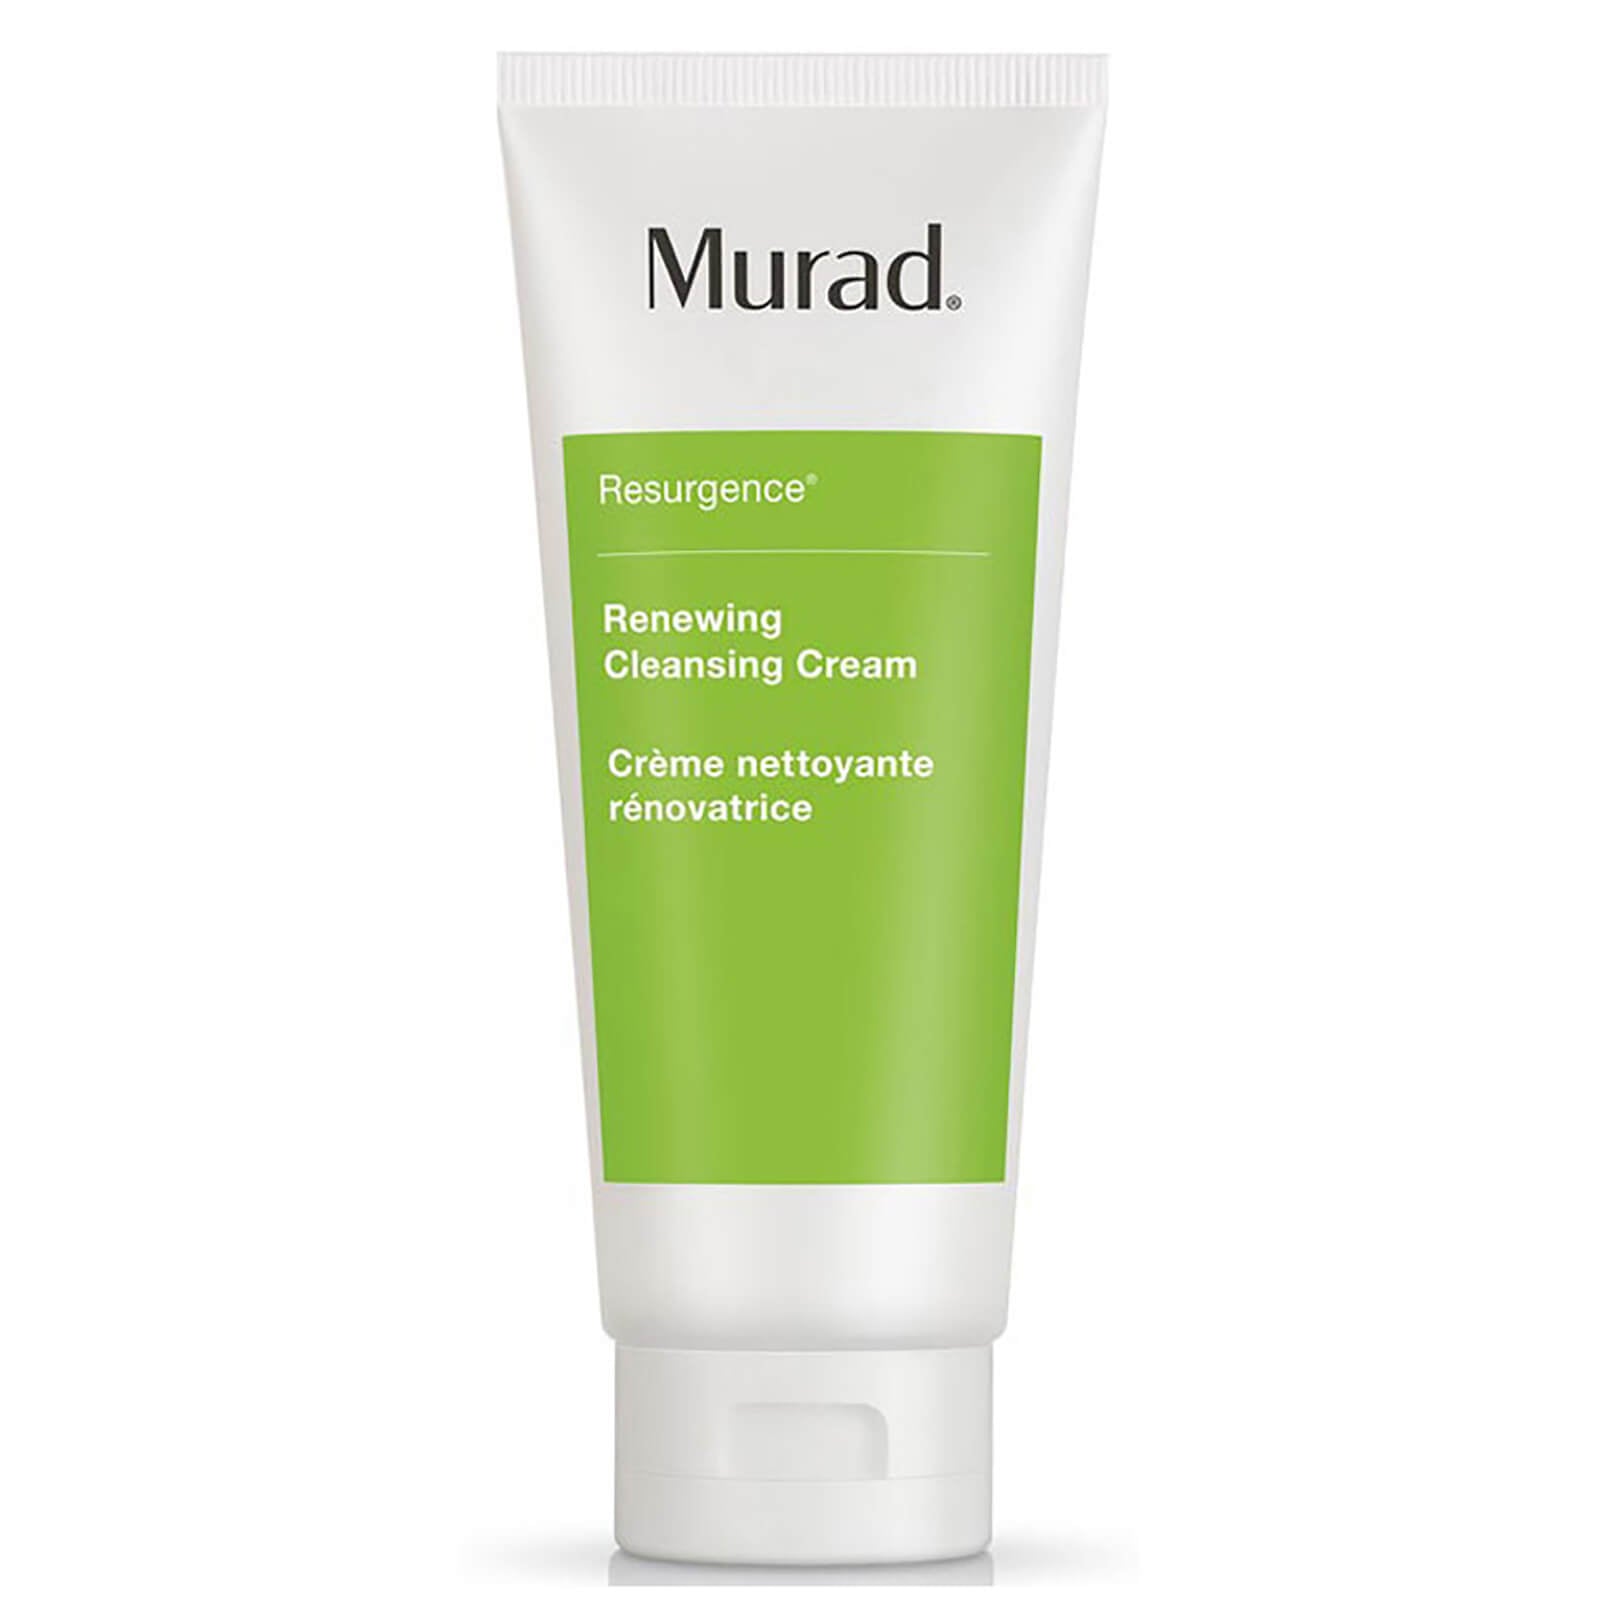 Renewing Cleansing Cream - The Perfect Products